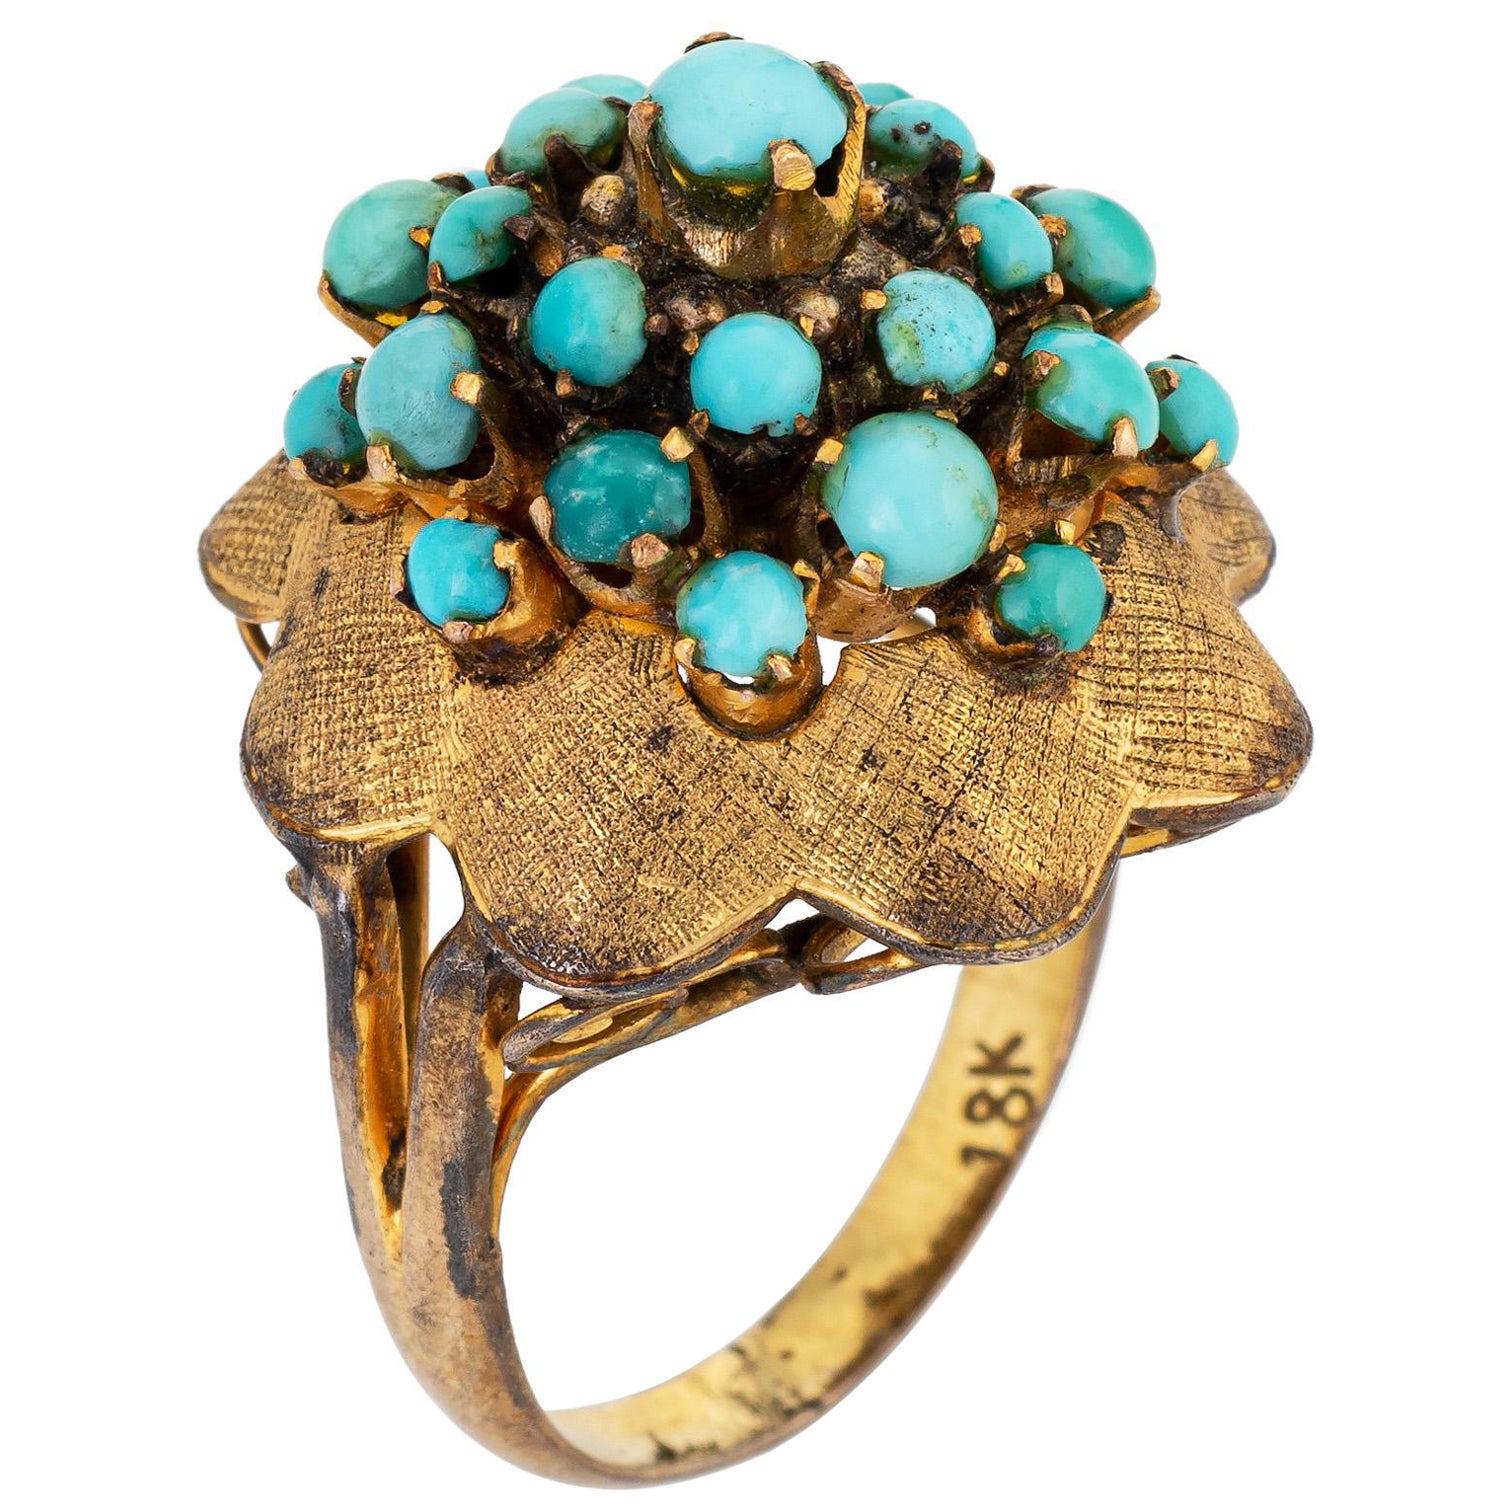 Vintage Turquoise Harem Ring 18k Yellow Gold Dome Estate Jewelry Fine Jewelry